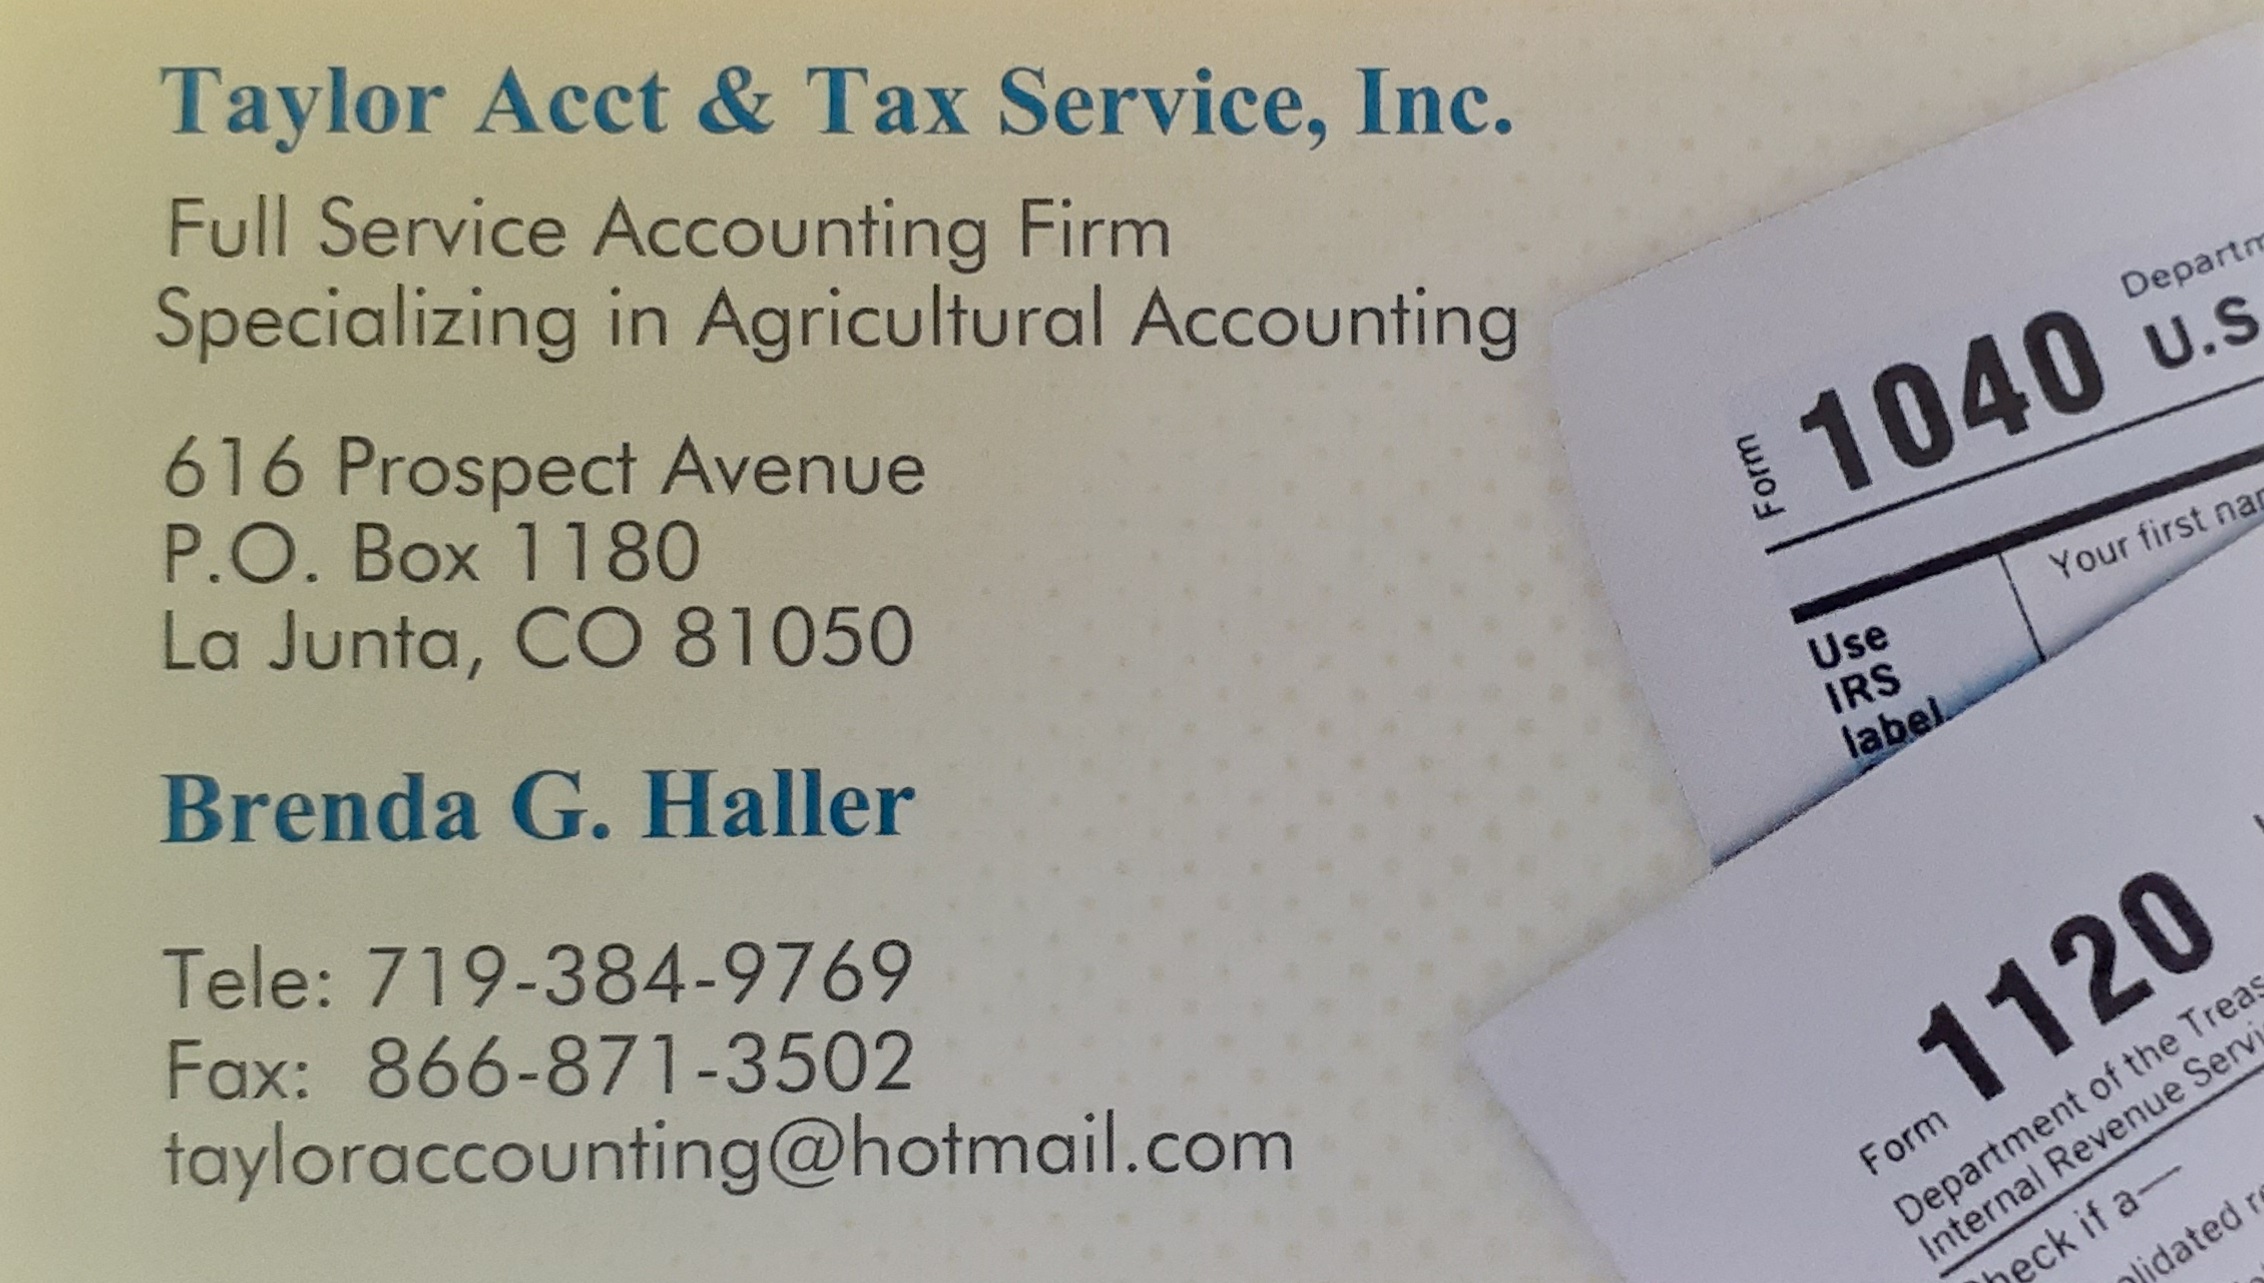 Taylor Accounting and Tax Service Business Card SECO News seconews.org 